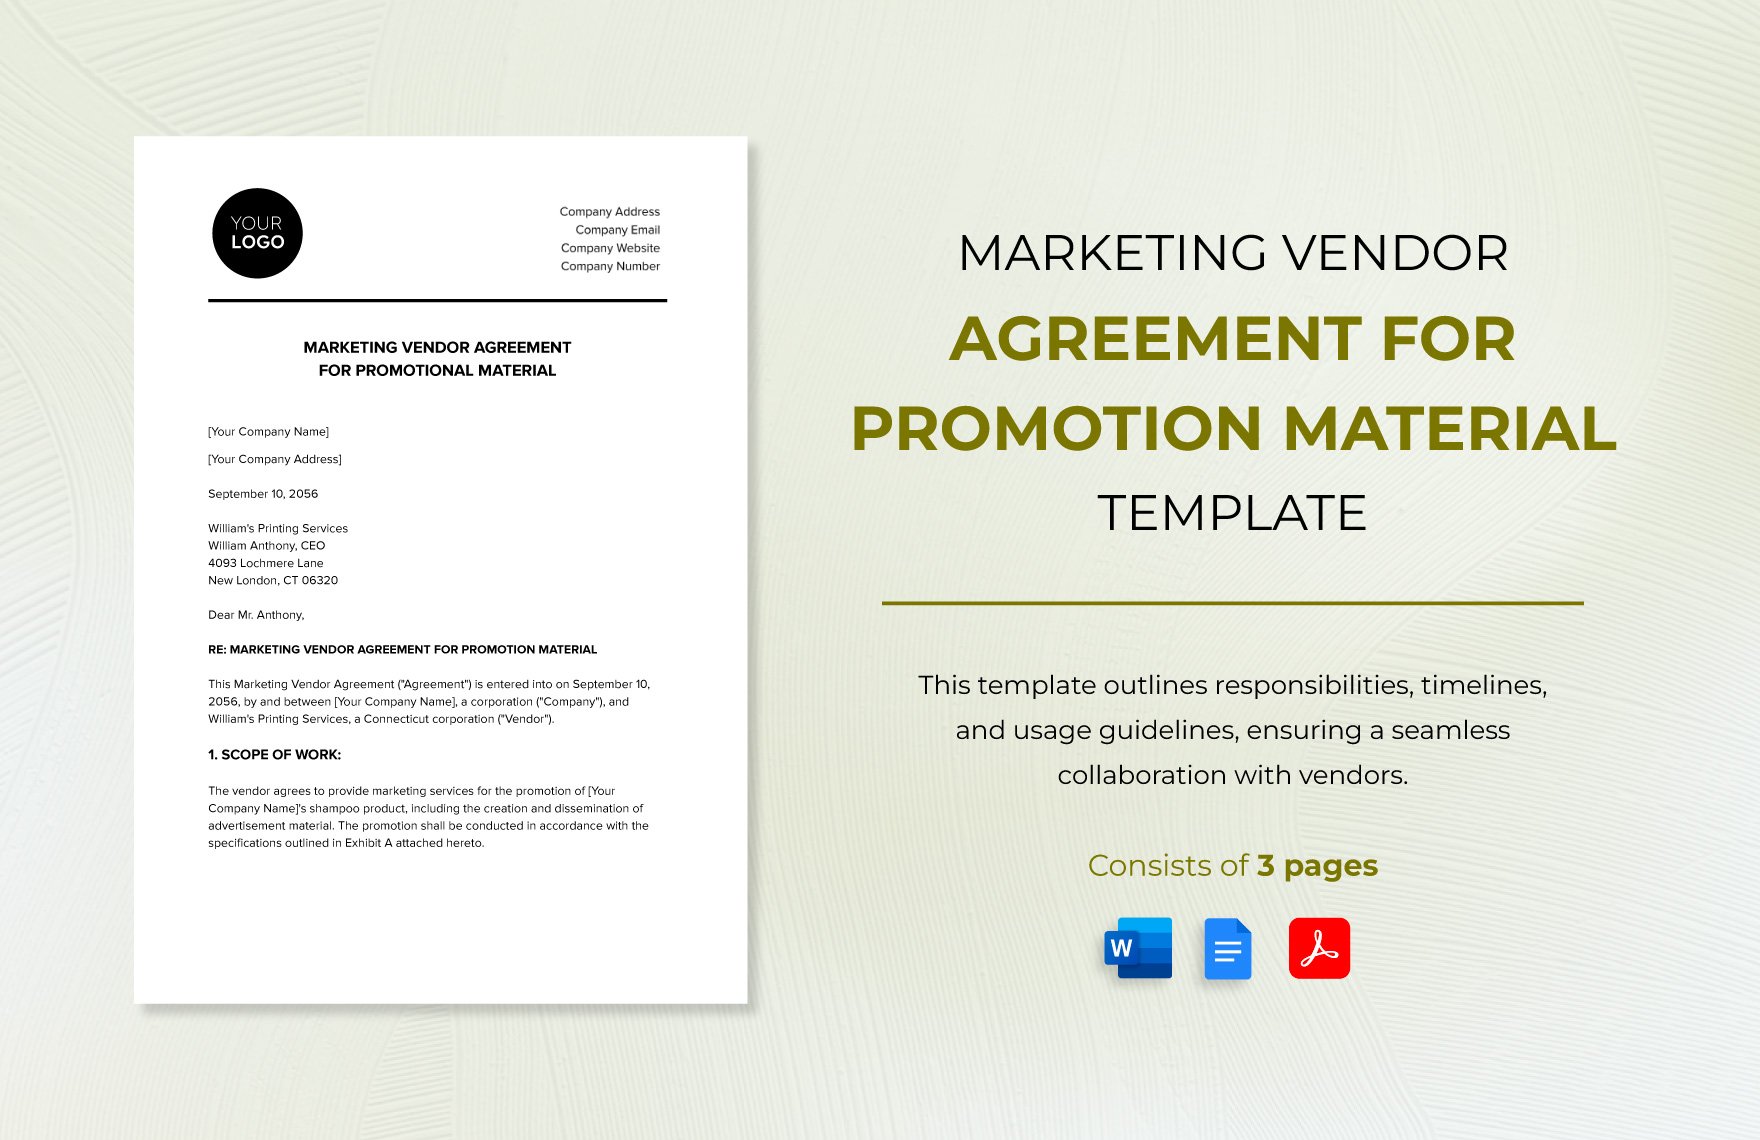 Marketing Vendor Agreement for Promotion Material Template in Word, Google Docs, PDF